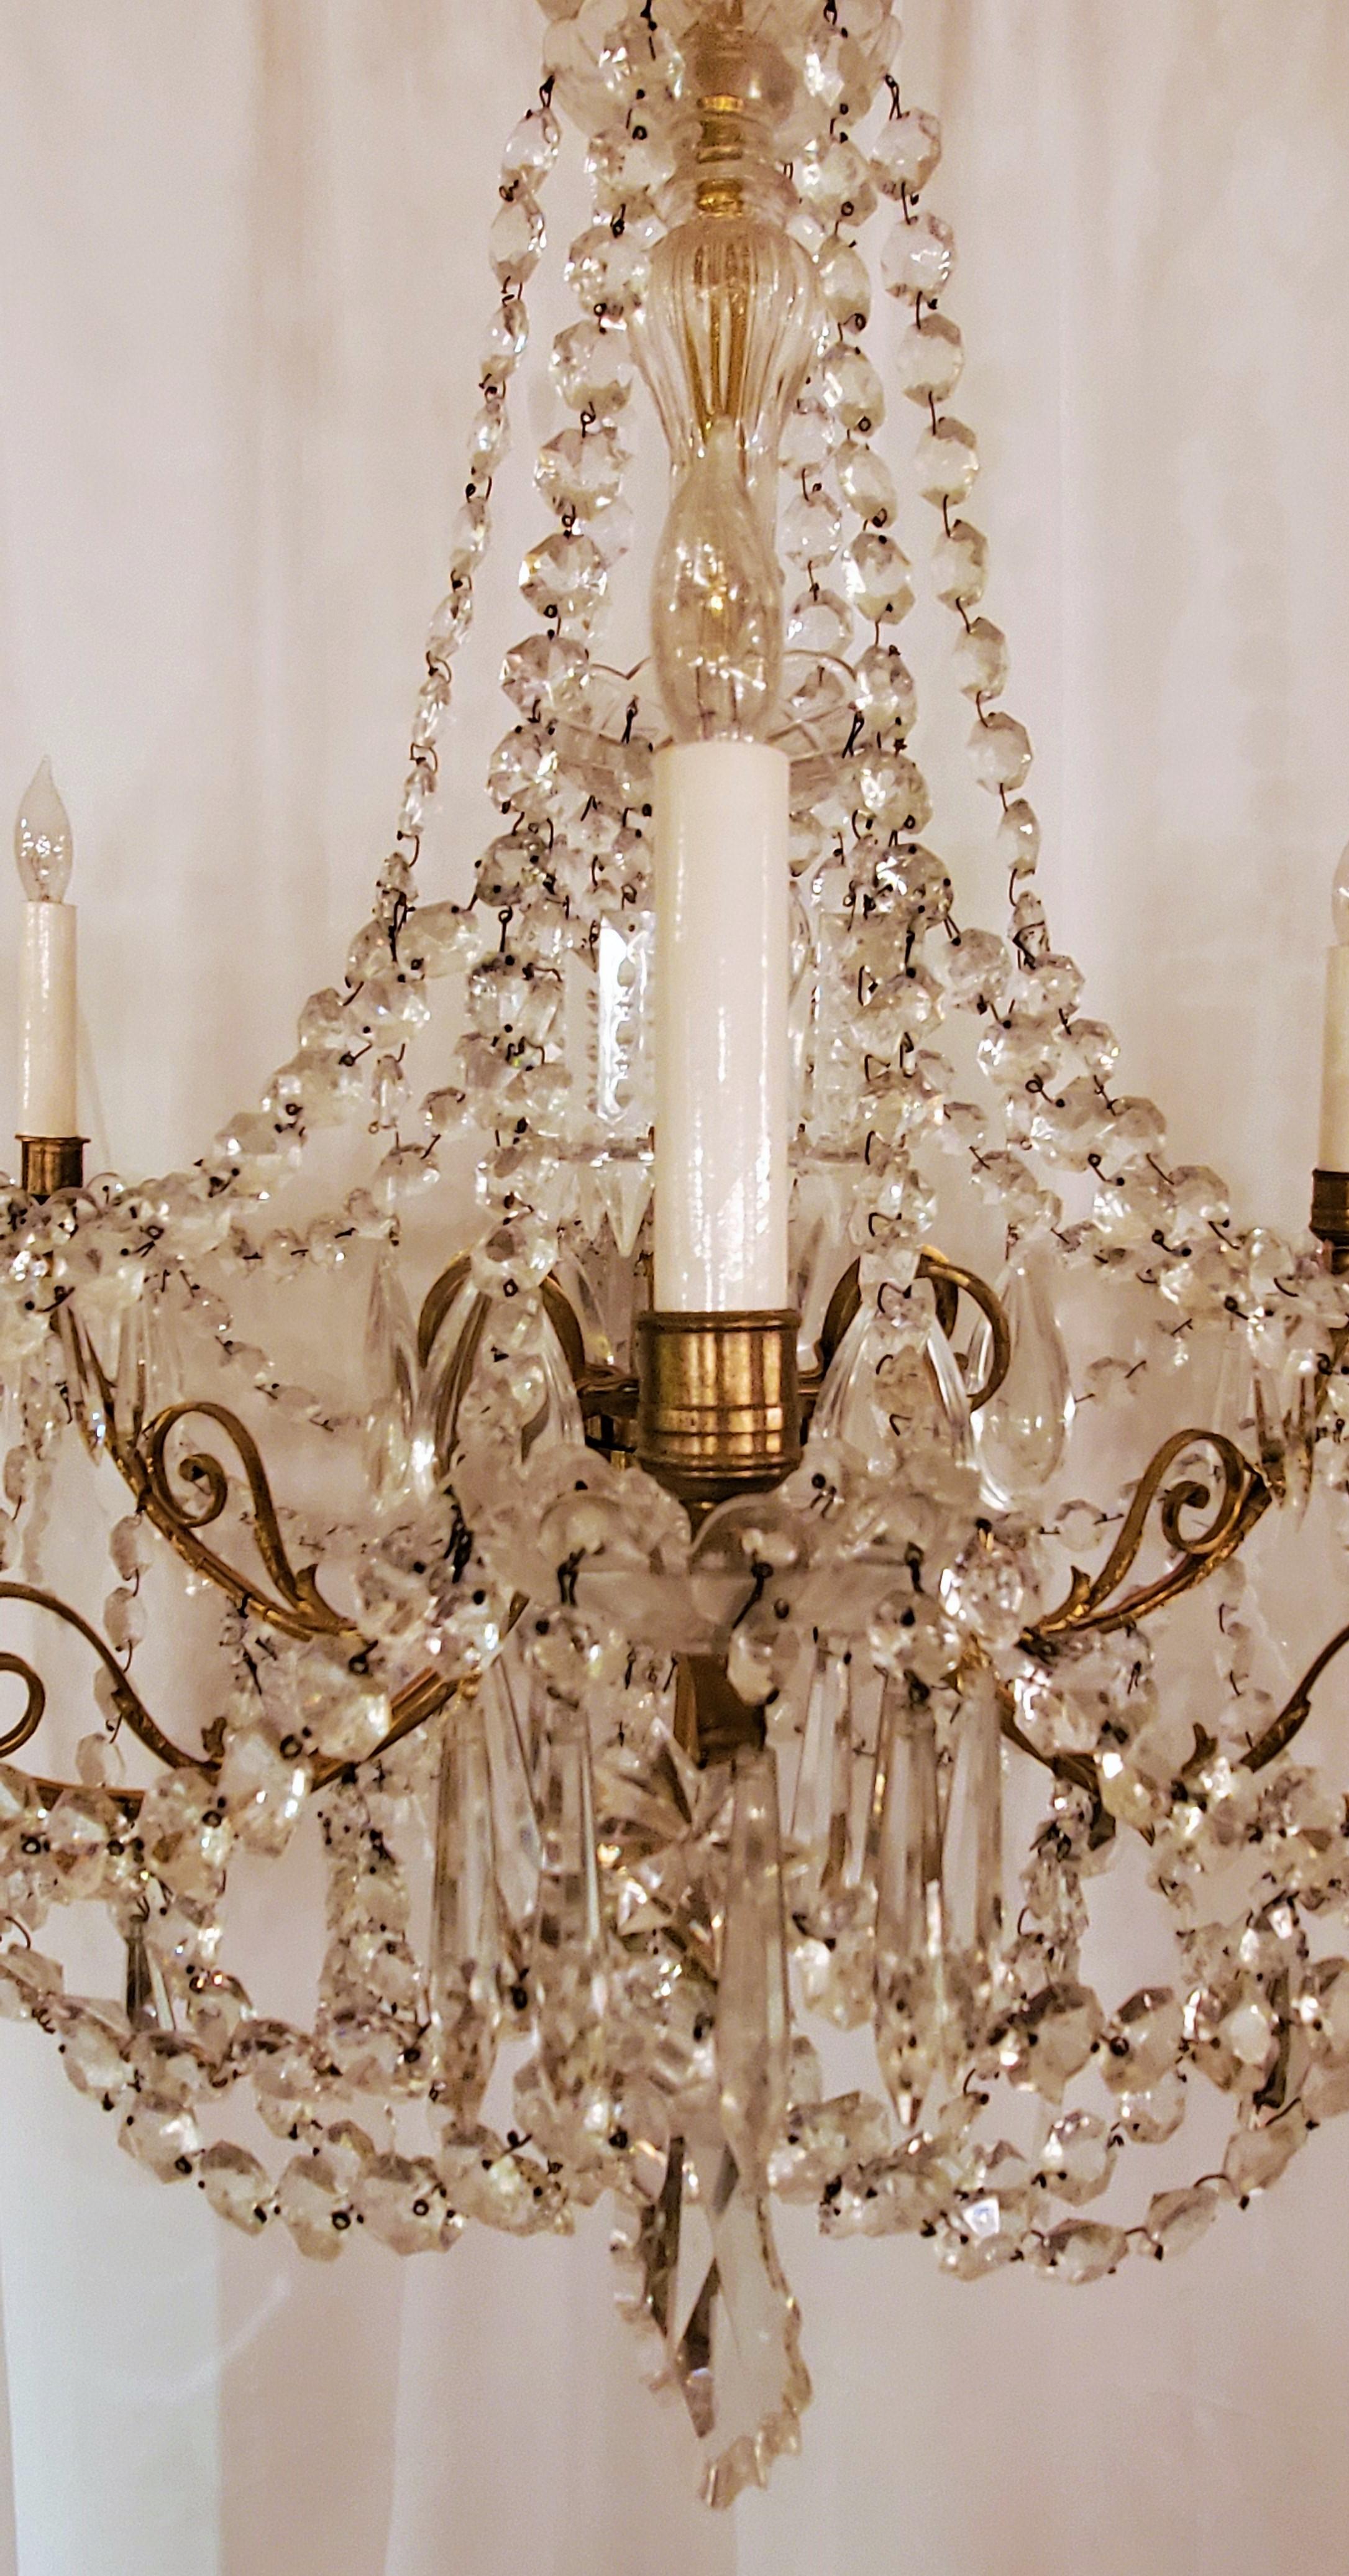 Antique French crystal and bronze chandelier.